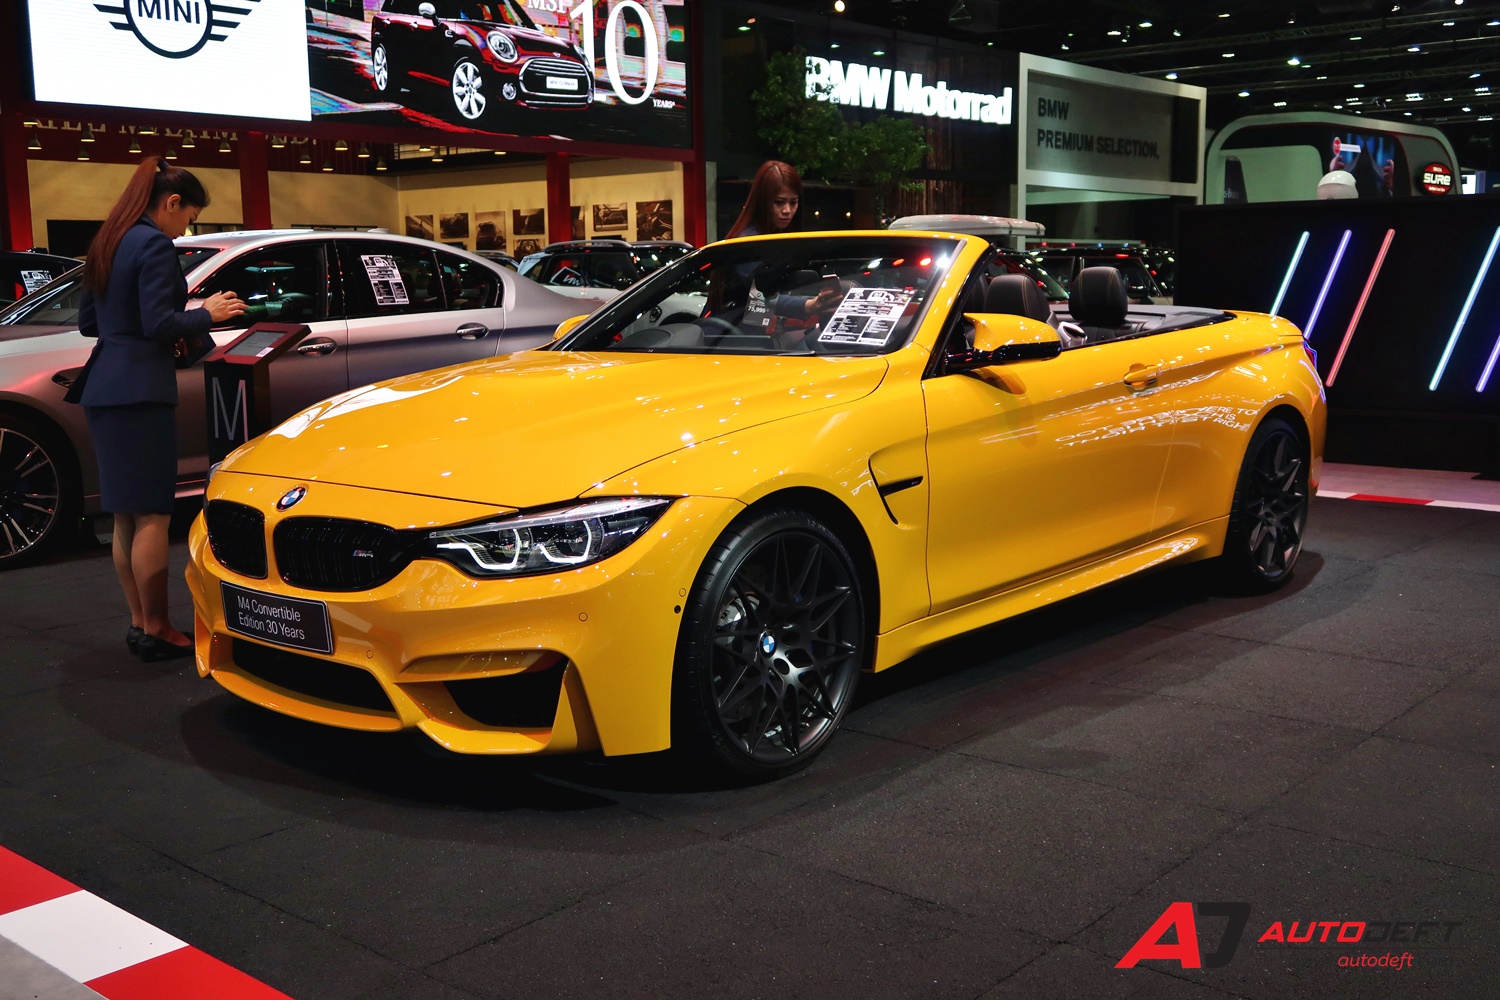 BMW M4 Convertible Edition 30 Years